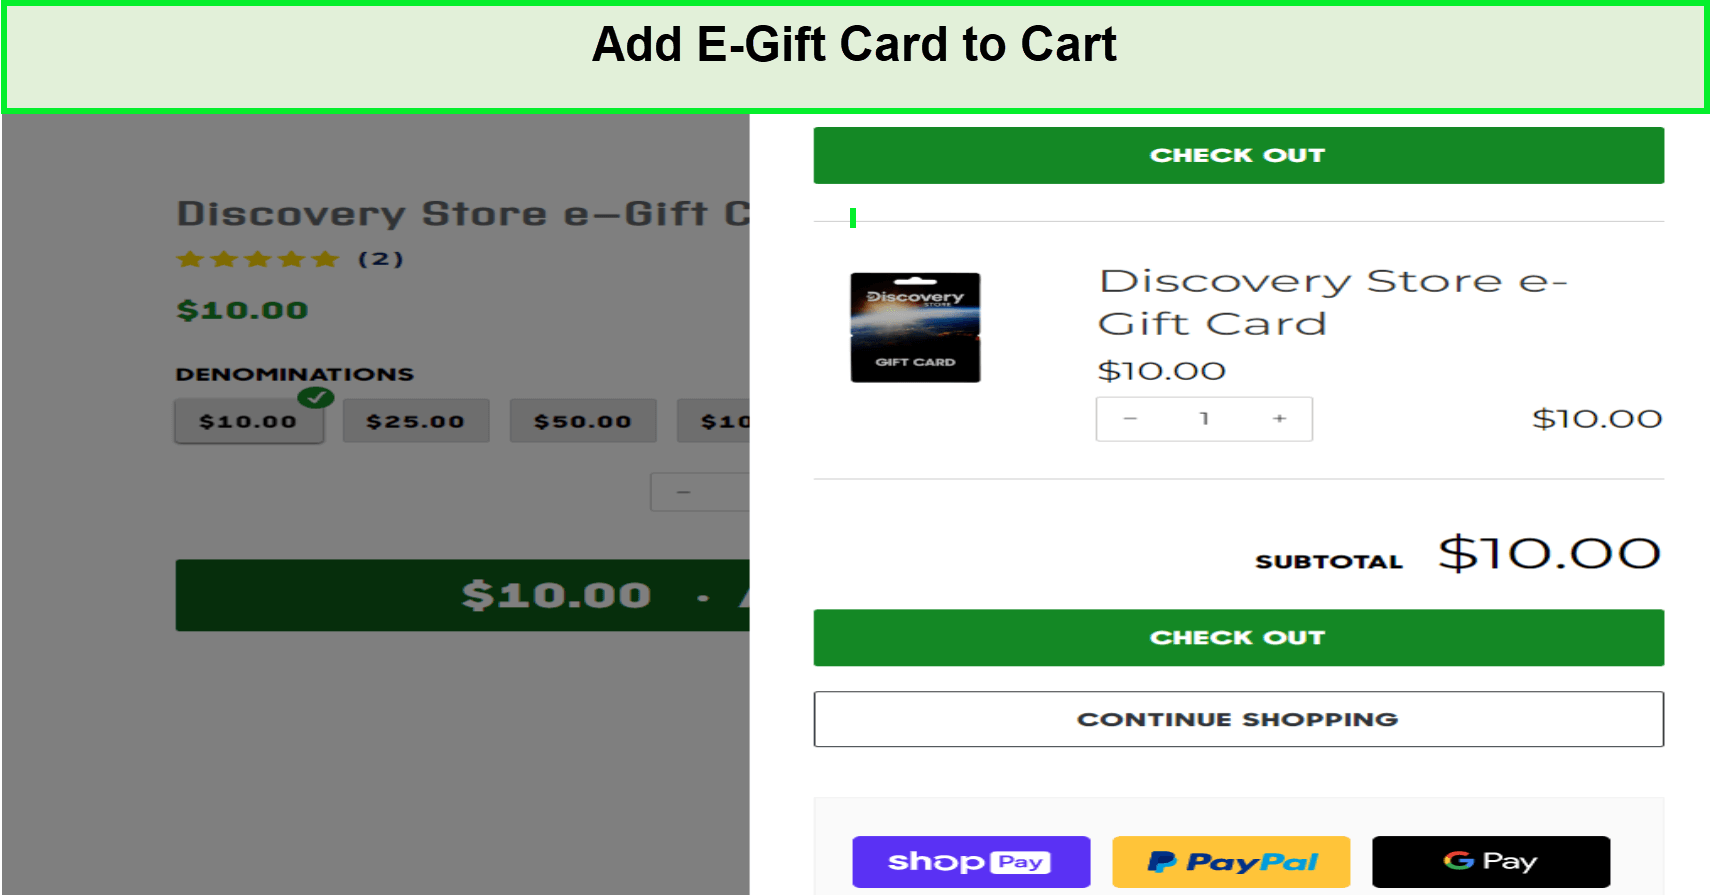 add-e-gift-card-out-side-usa